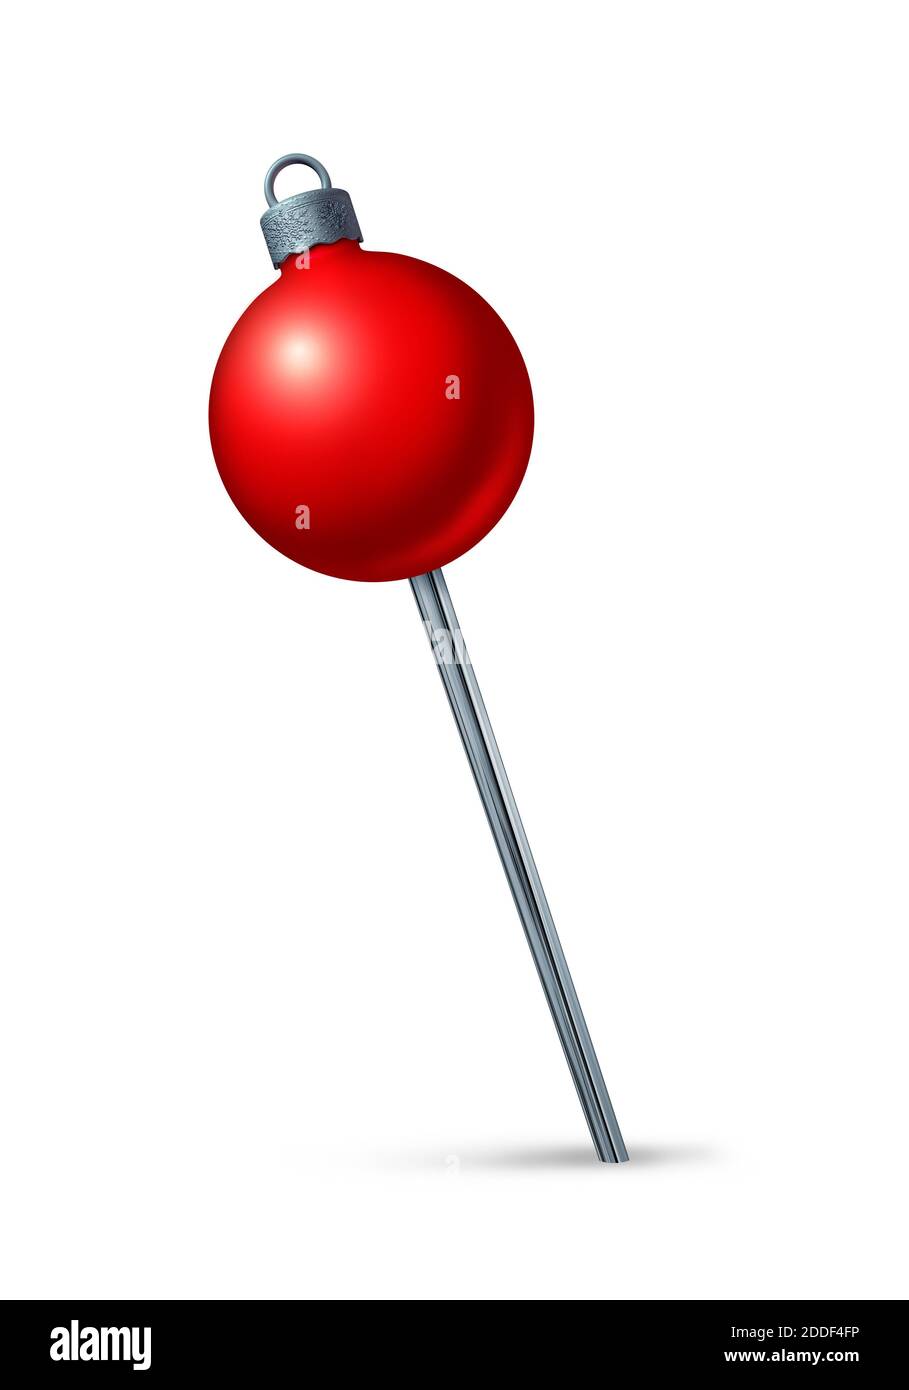 Christmas red pushpin as a holiday navigation symbol of winter season travel and festive xmas location or seasonal party position as a 3D render. Stock Photo